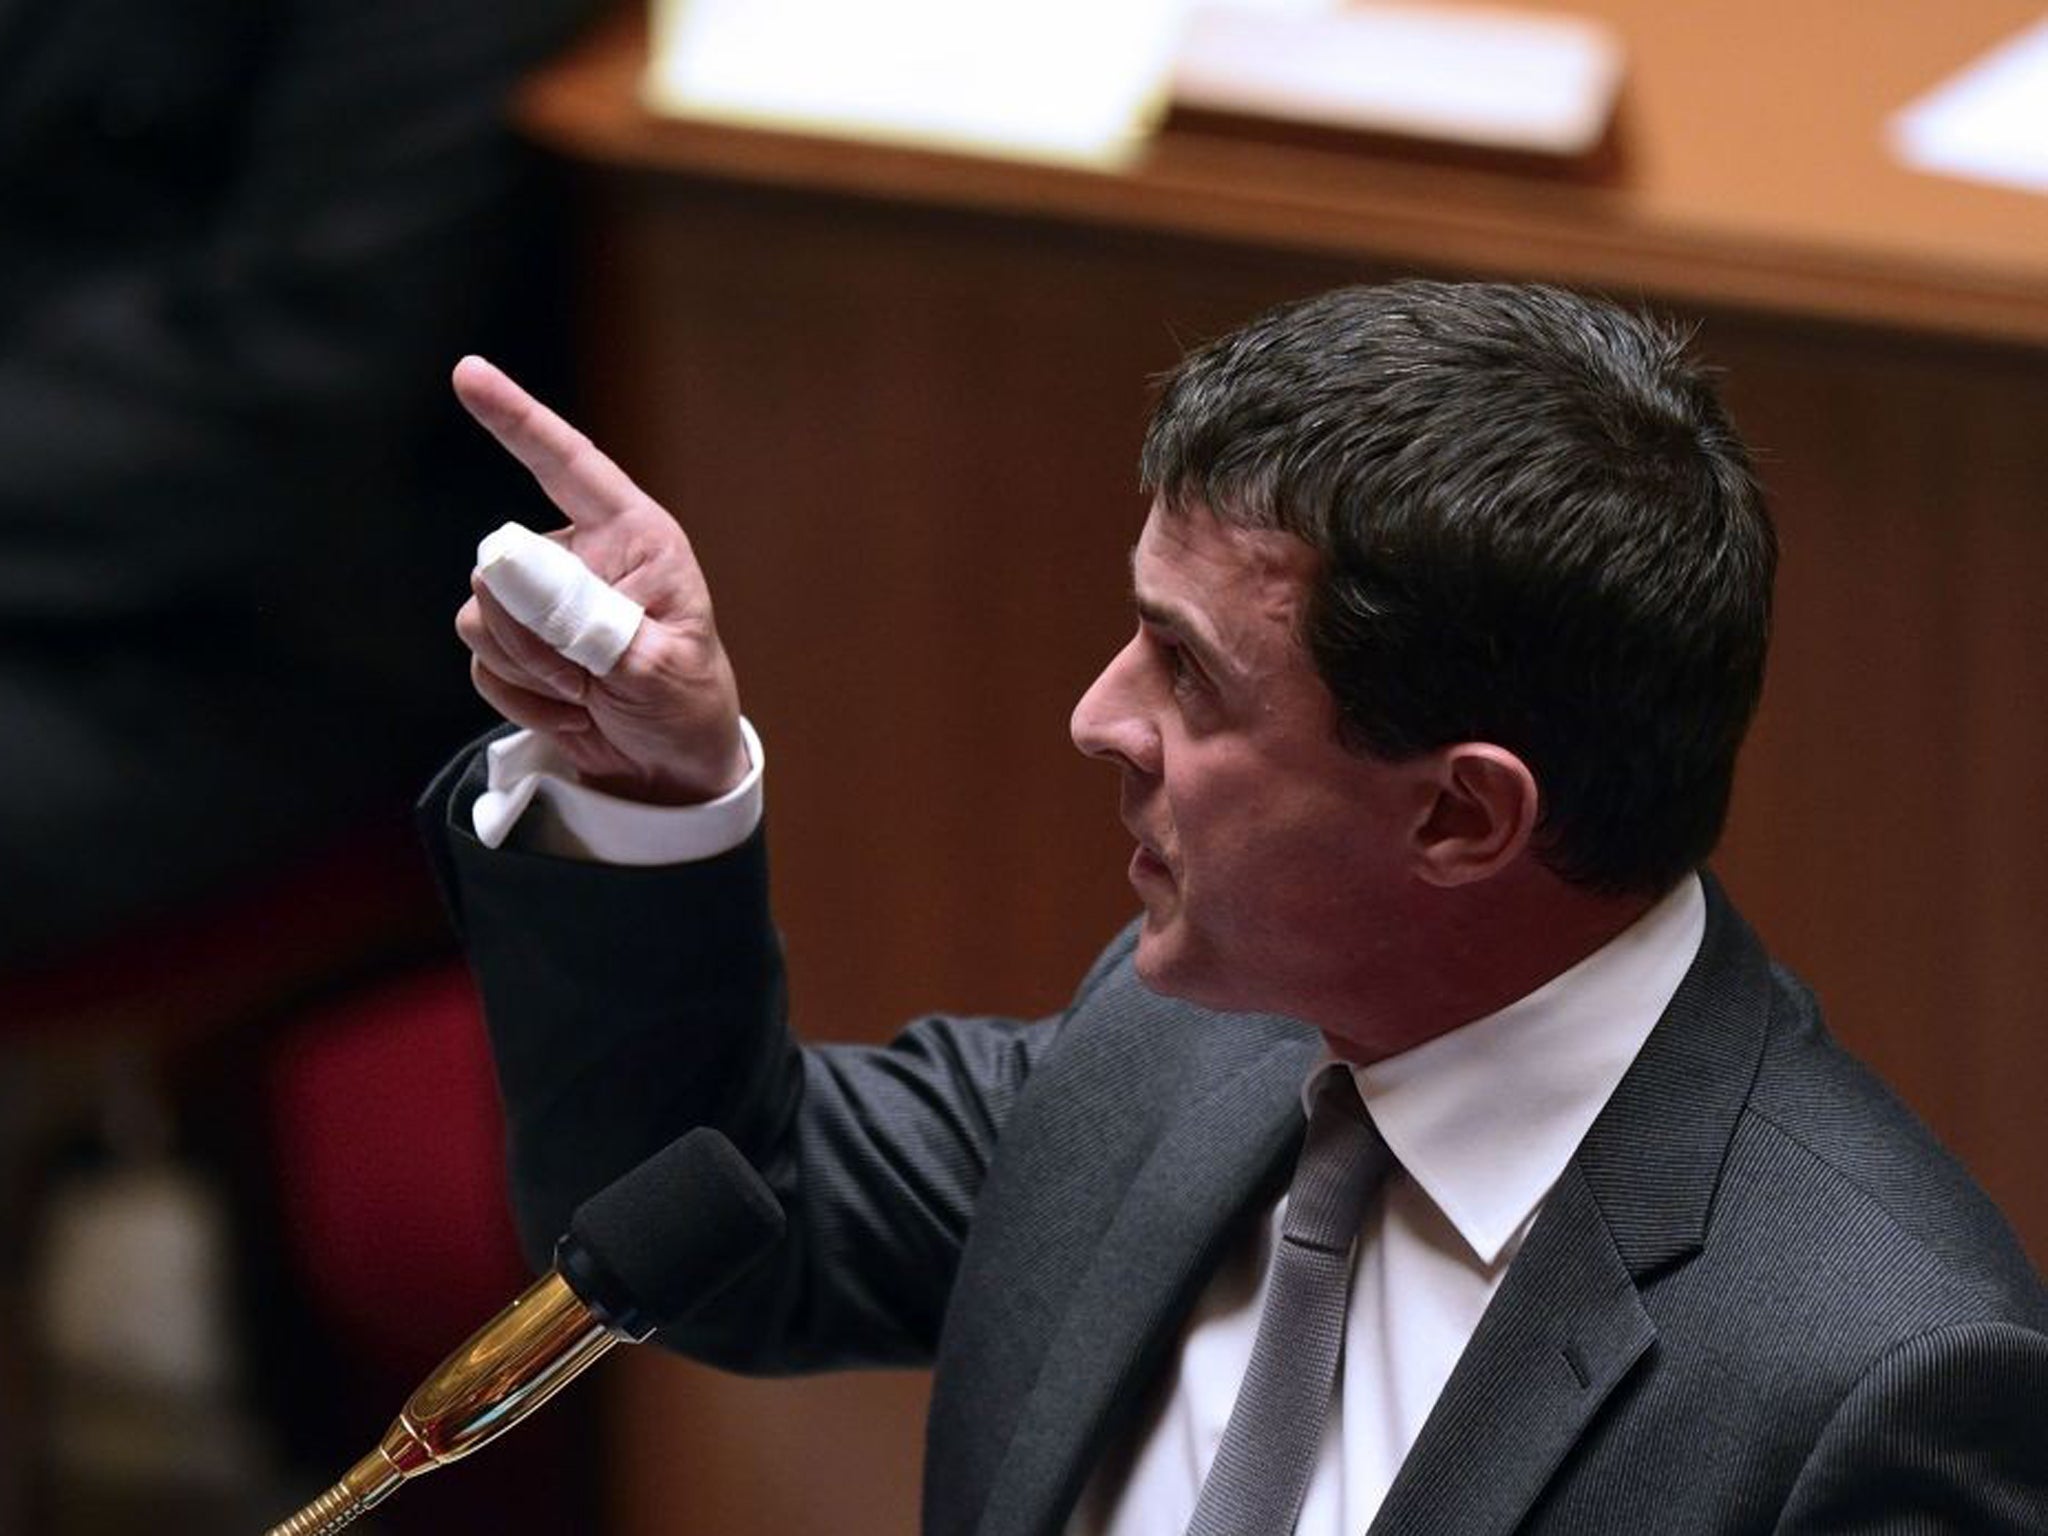 Angry recriminations against the hard-line interior minister Manuel Valls after 15-year-old Roma schoolgirl deported